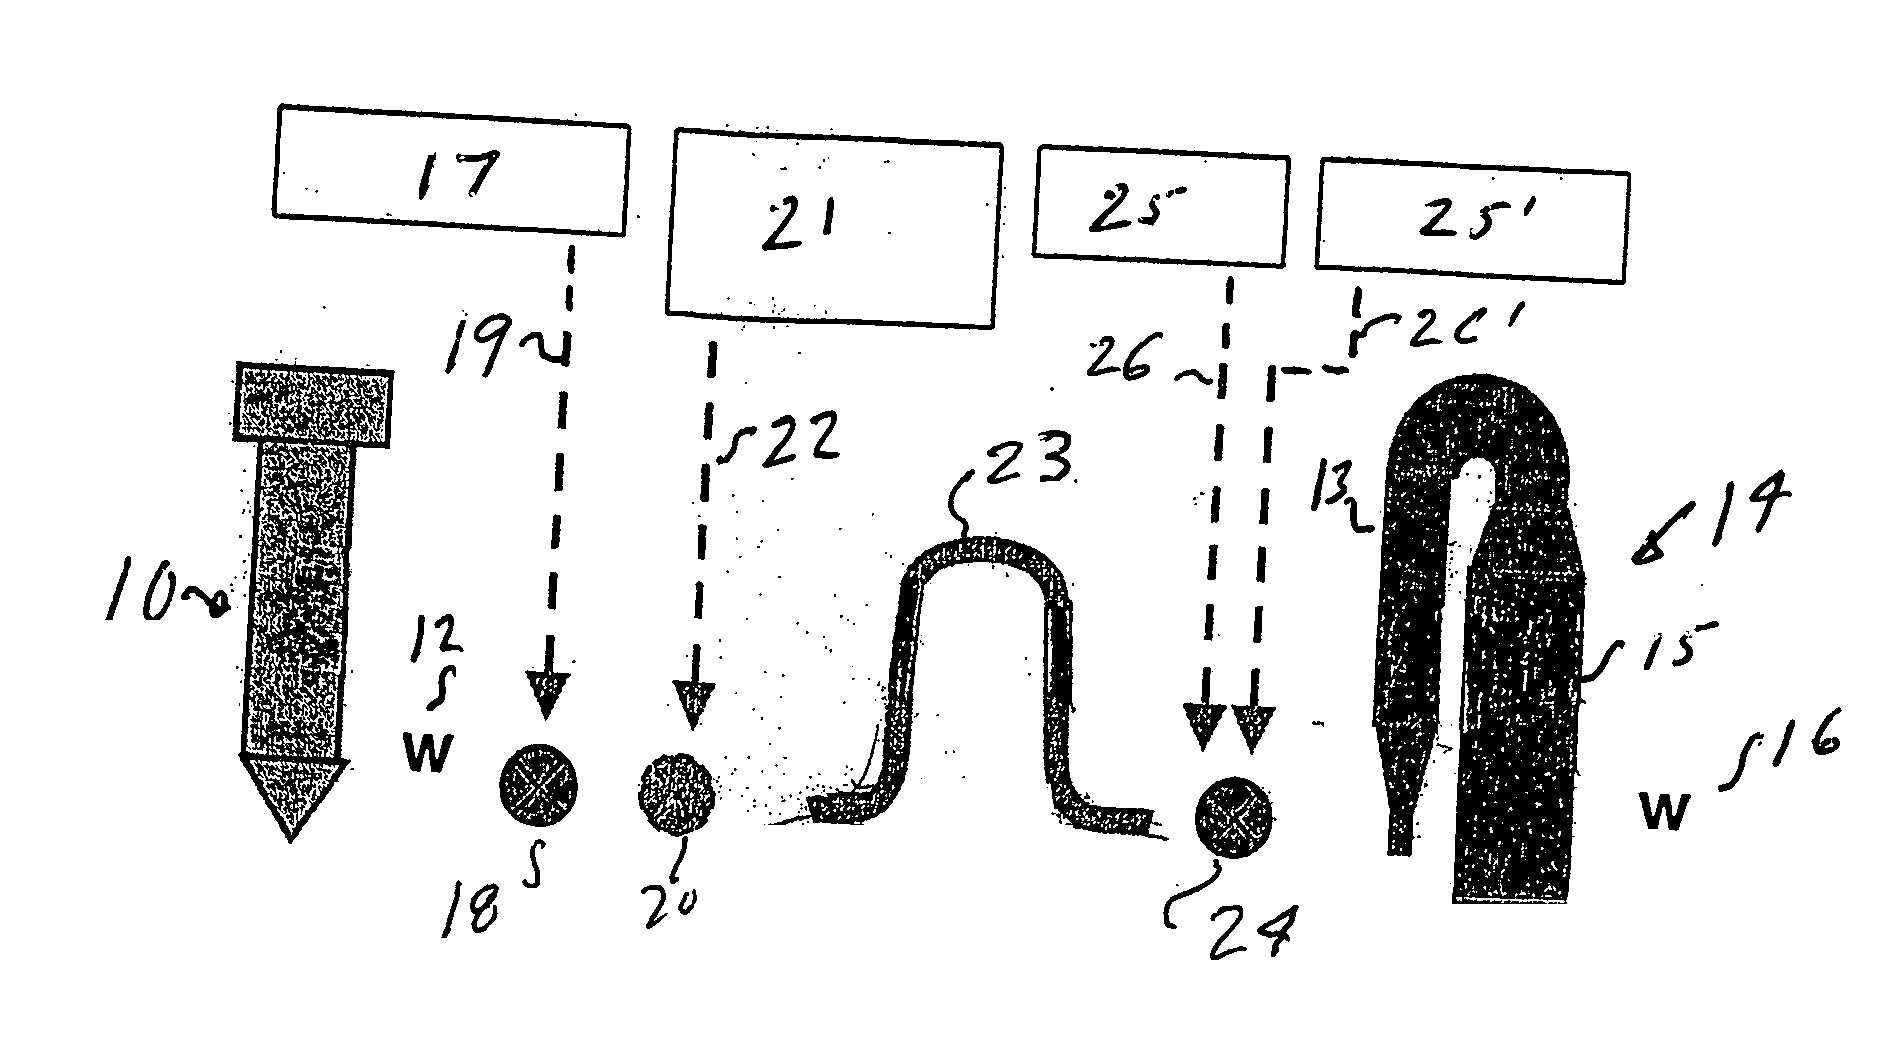 Methods for making carboxylated pulp fibers